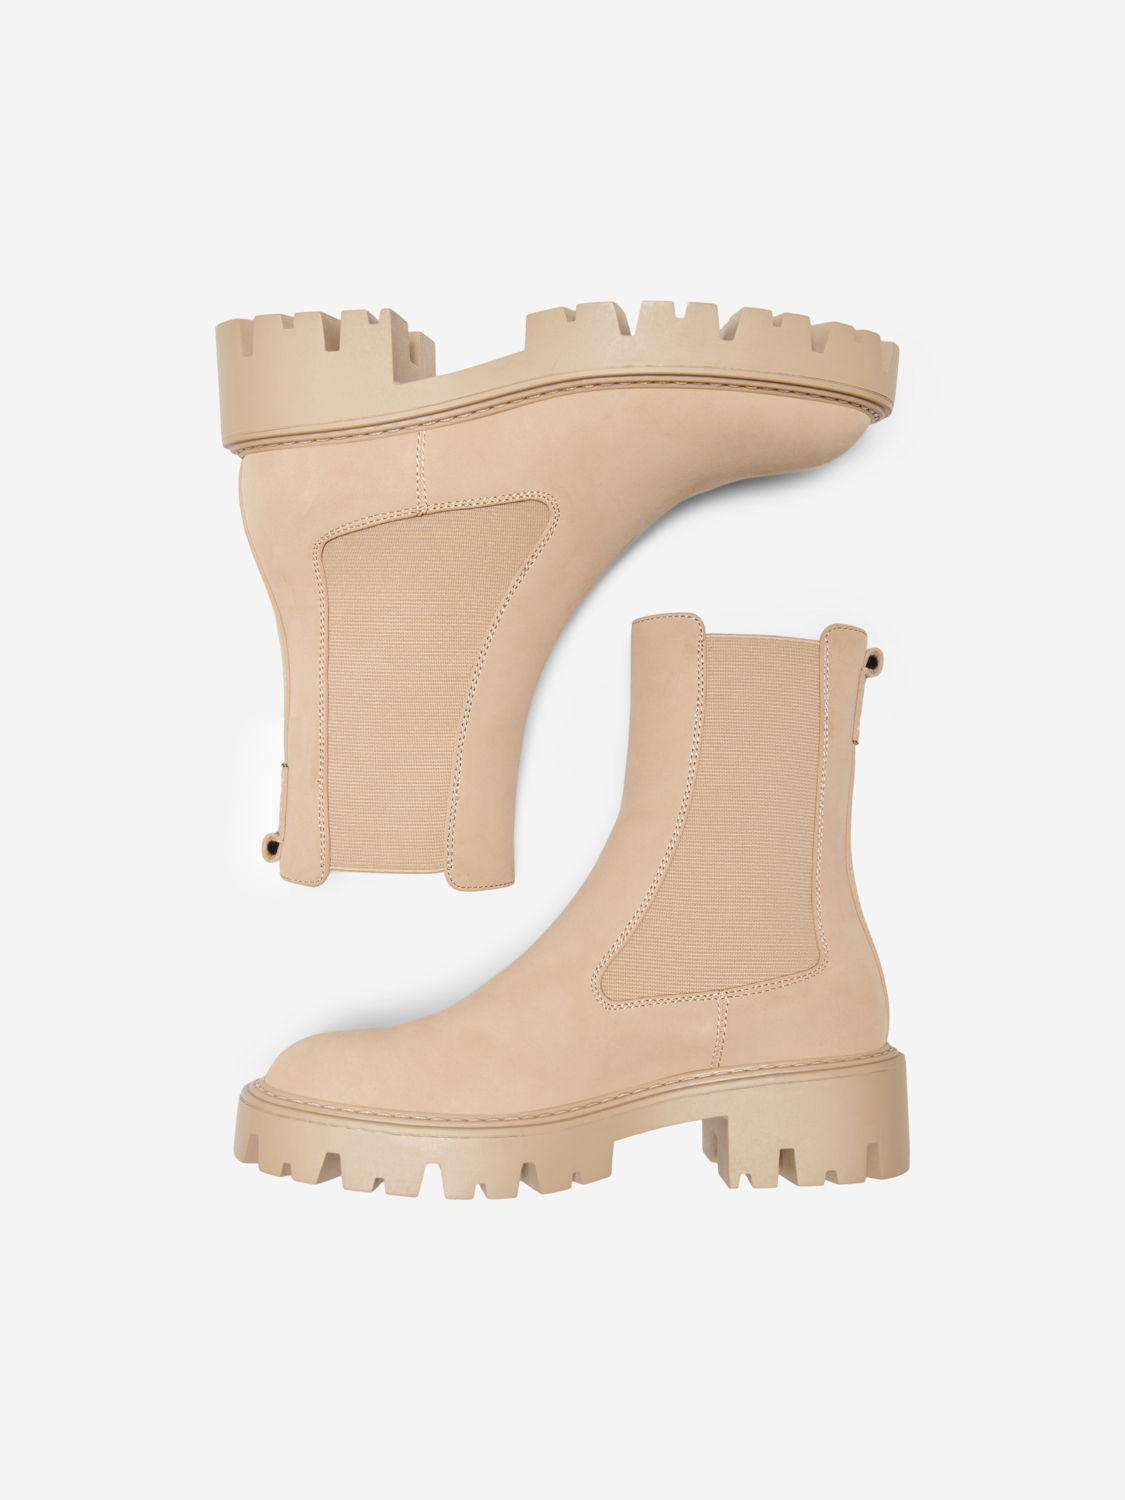 FINAL SALE - Betty nubuck chunky-sole boots, CAMEL, large